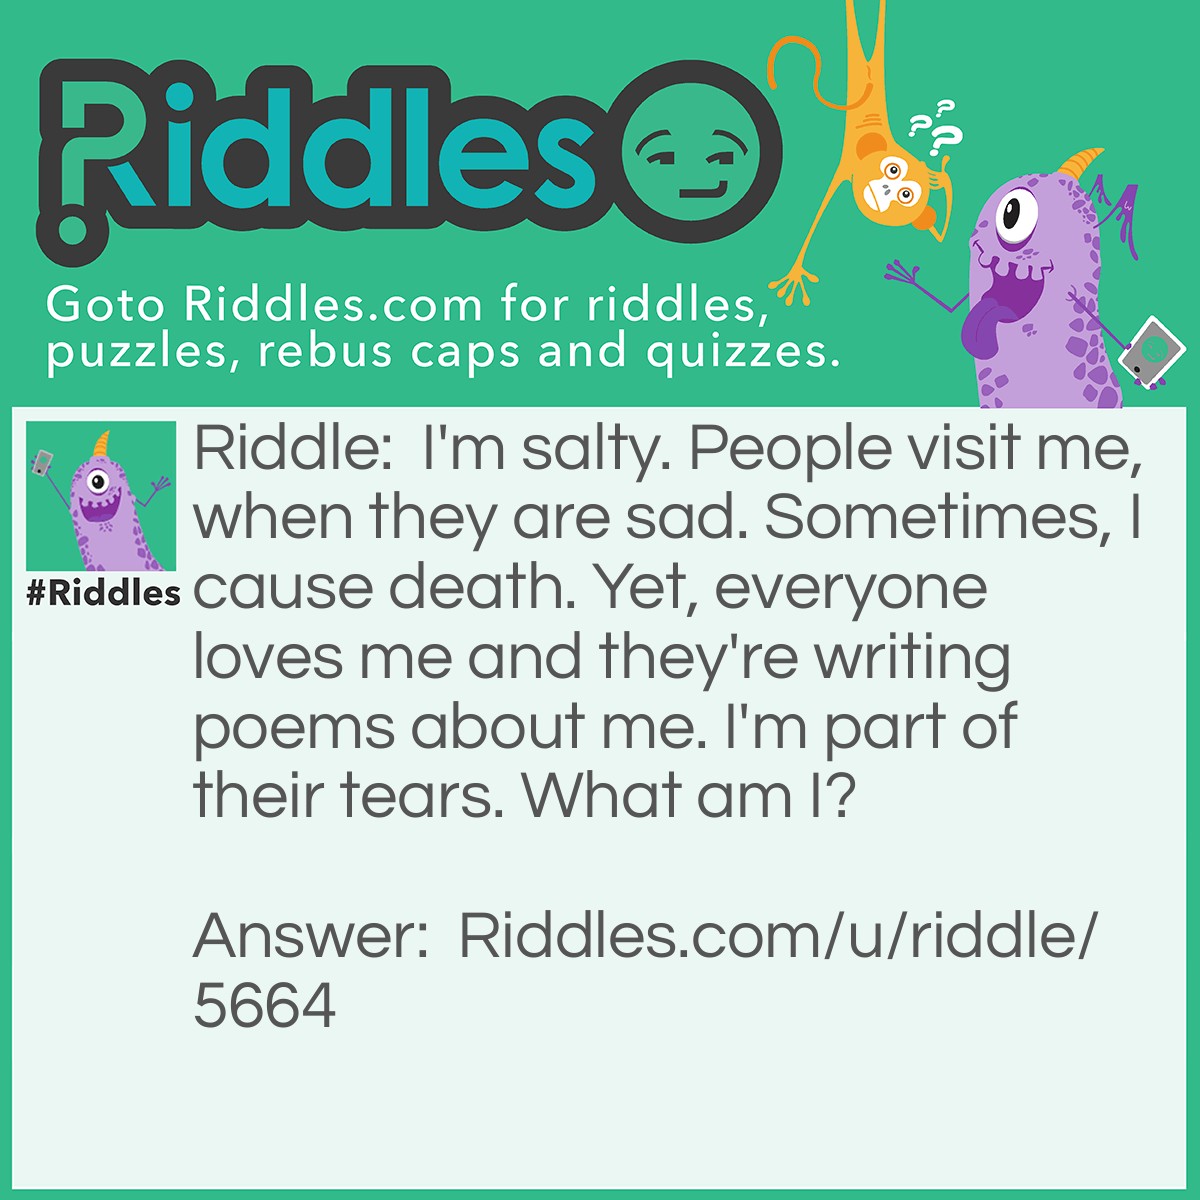 Riddle: I'm salty. People visit me, when they are sad. Sometimes, I cause death. Yet, everyone loves me and they're writing poems about me. I'm part of their tears. What am I? Answer: The Ocean.